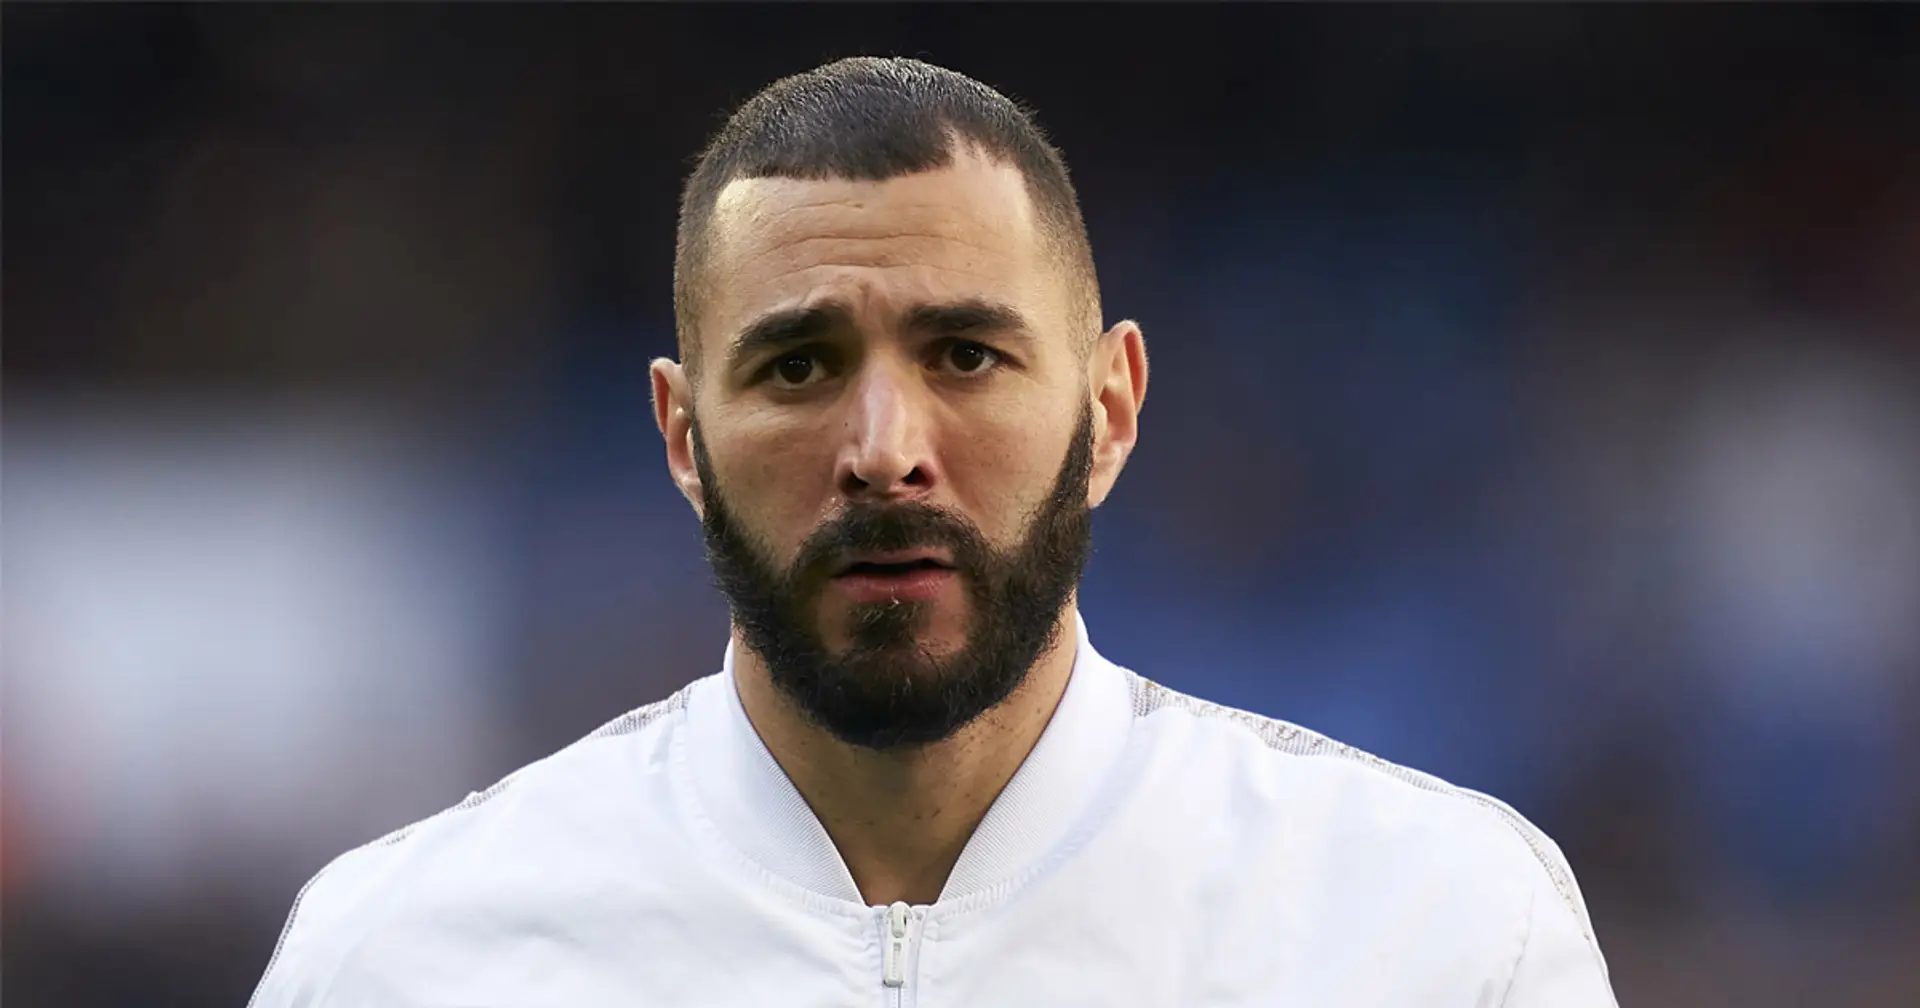 Revealed: Where Karim Benzema stands among Europe's deadliest finishers since 2016